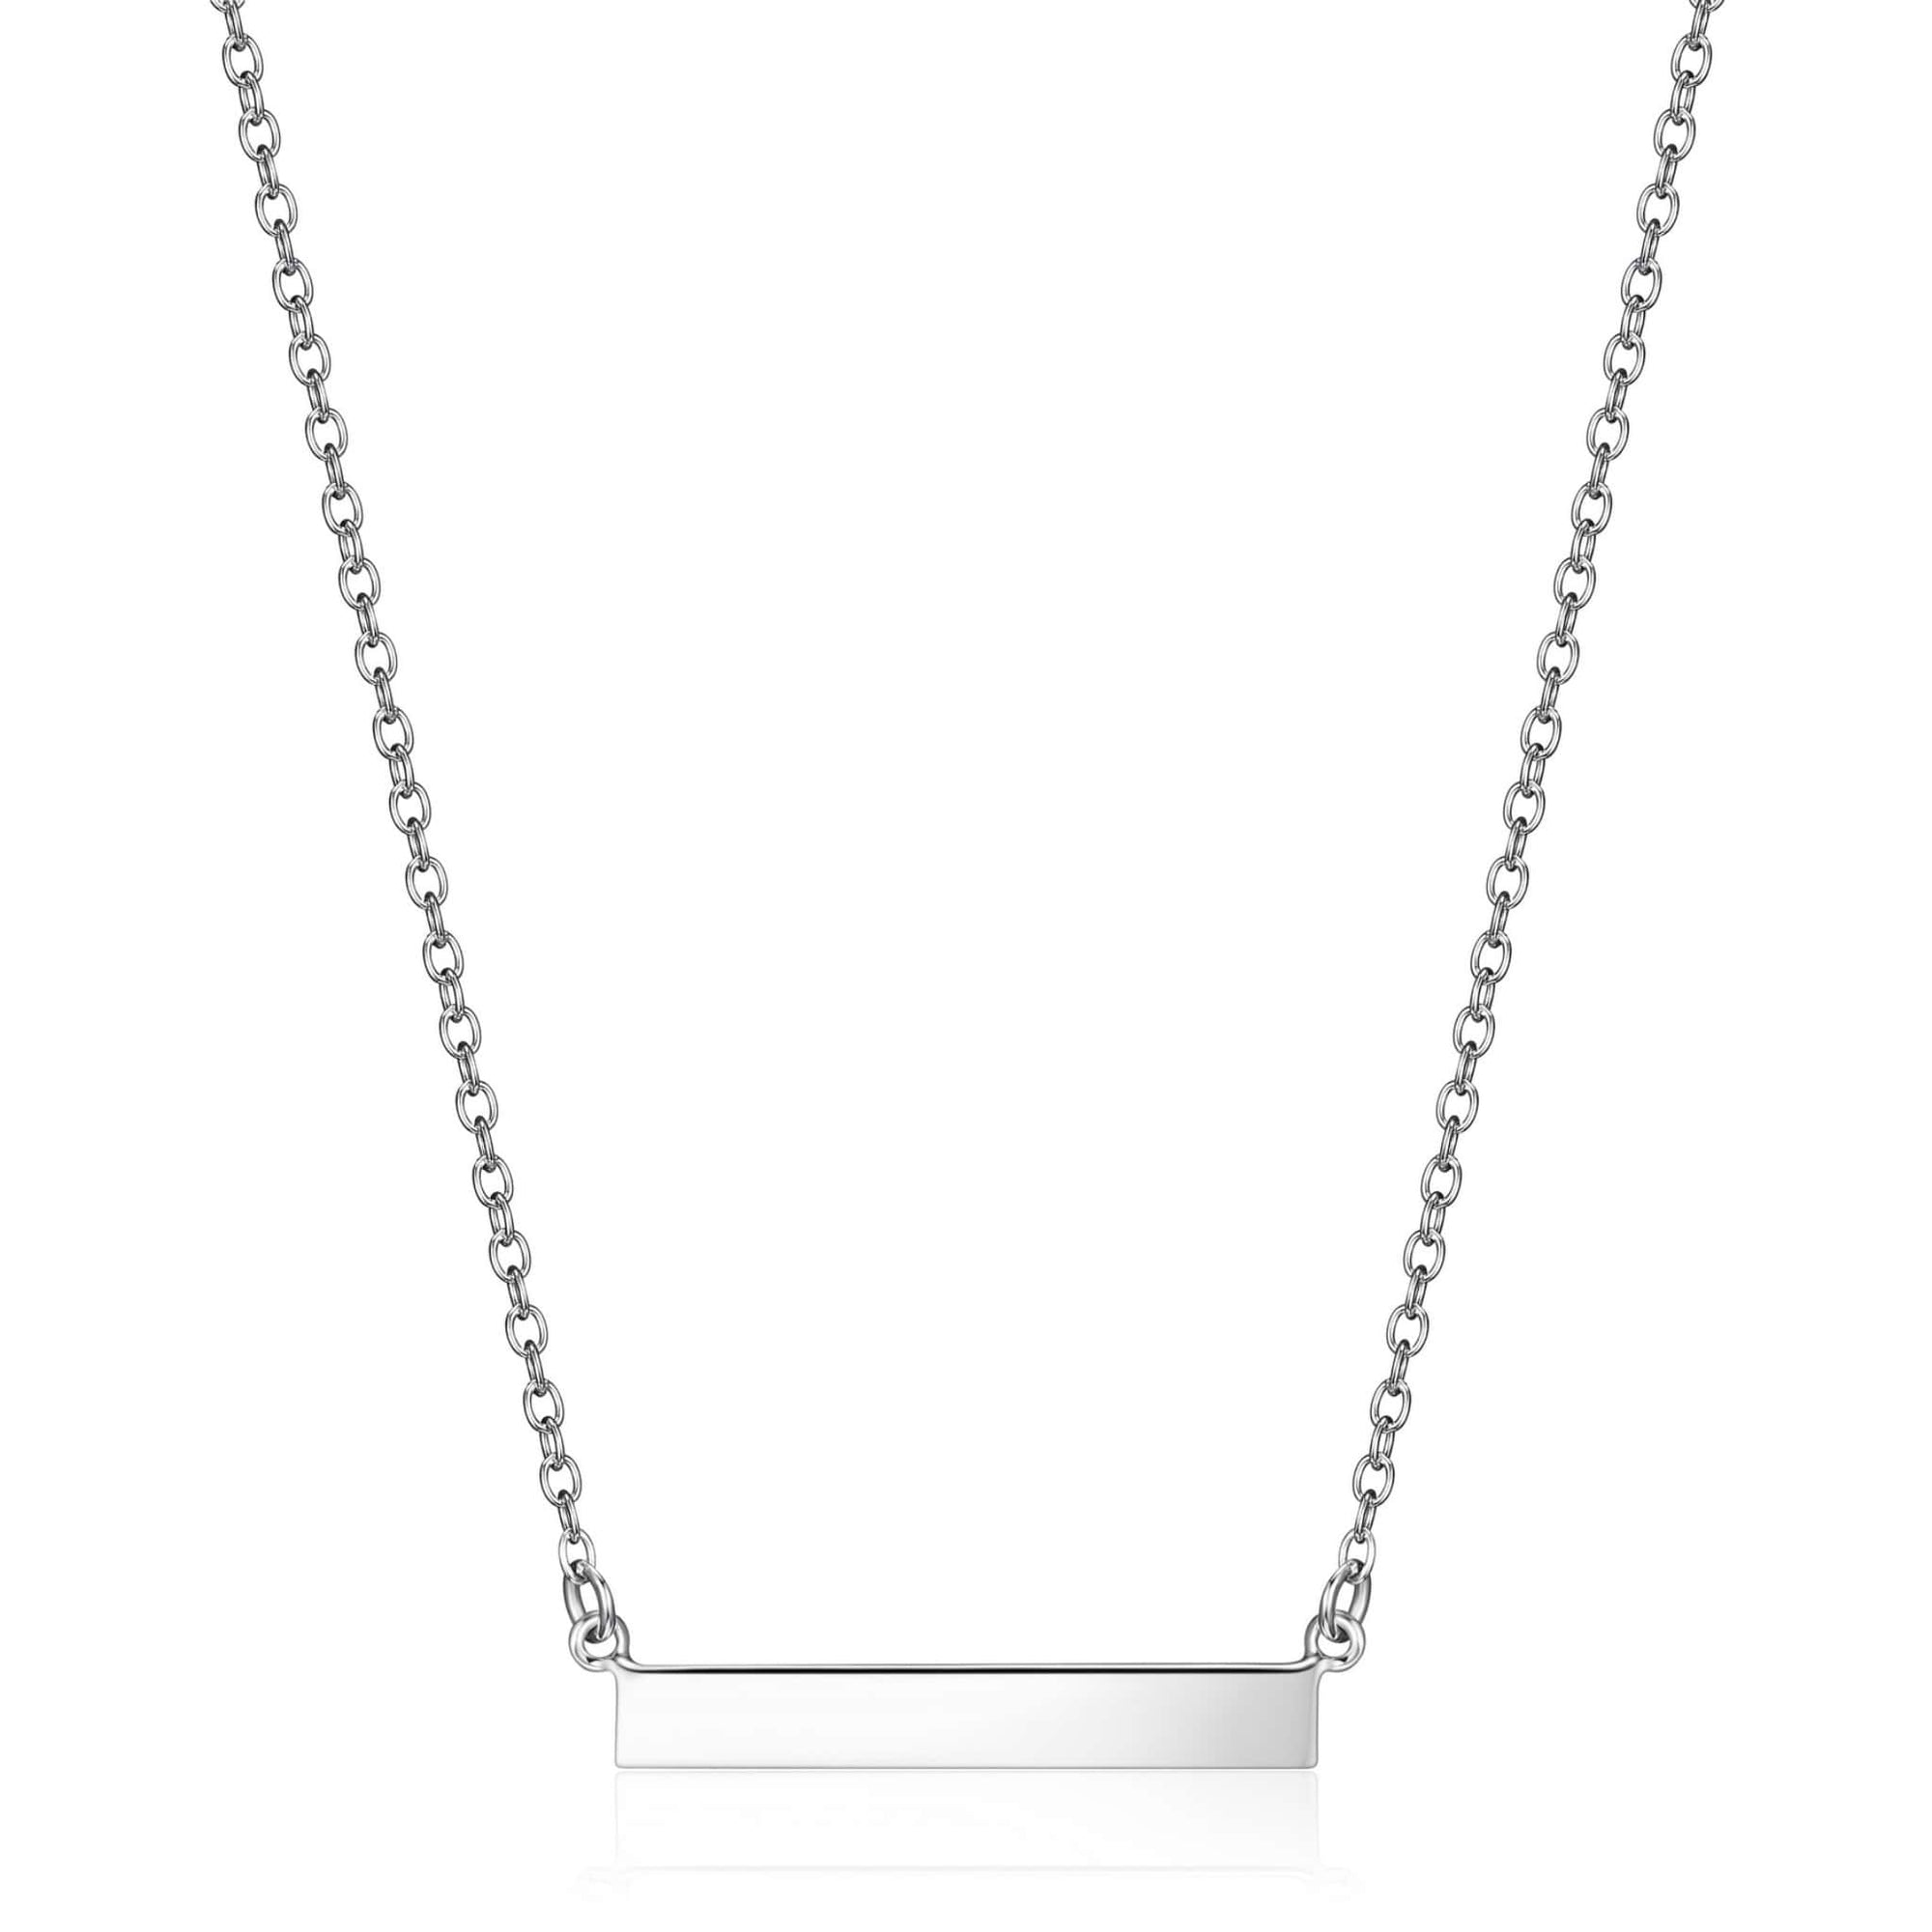 Engravable Silver Bar Necklace at Arman's Jewellers